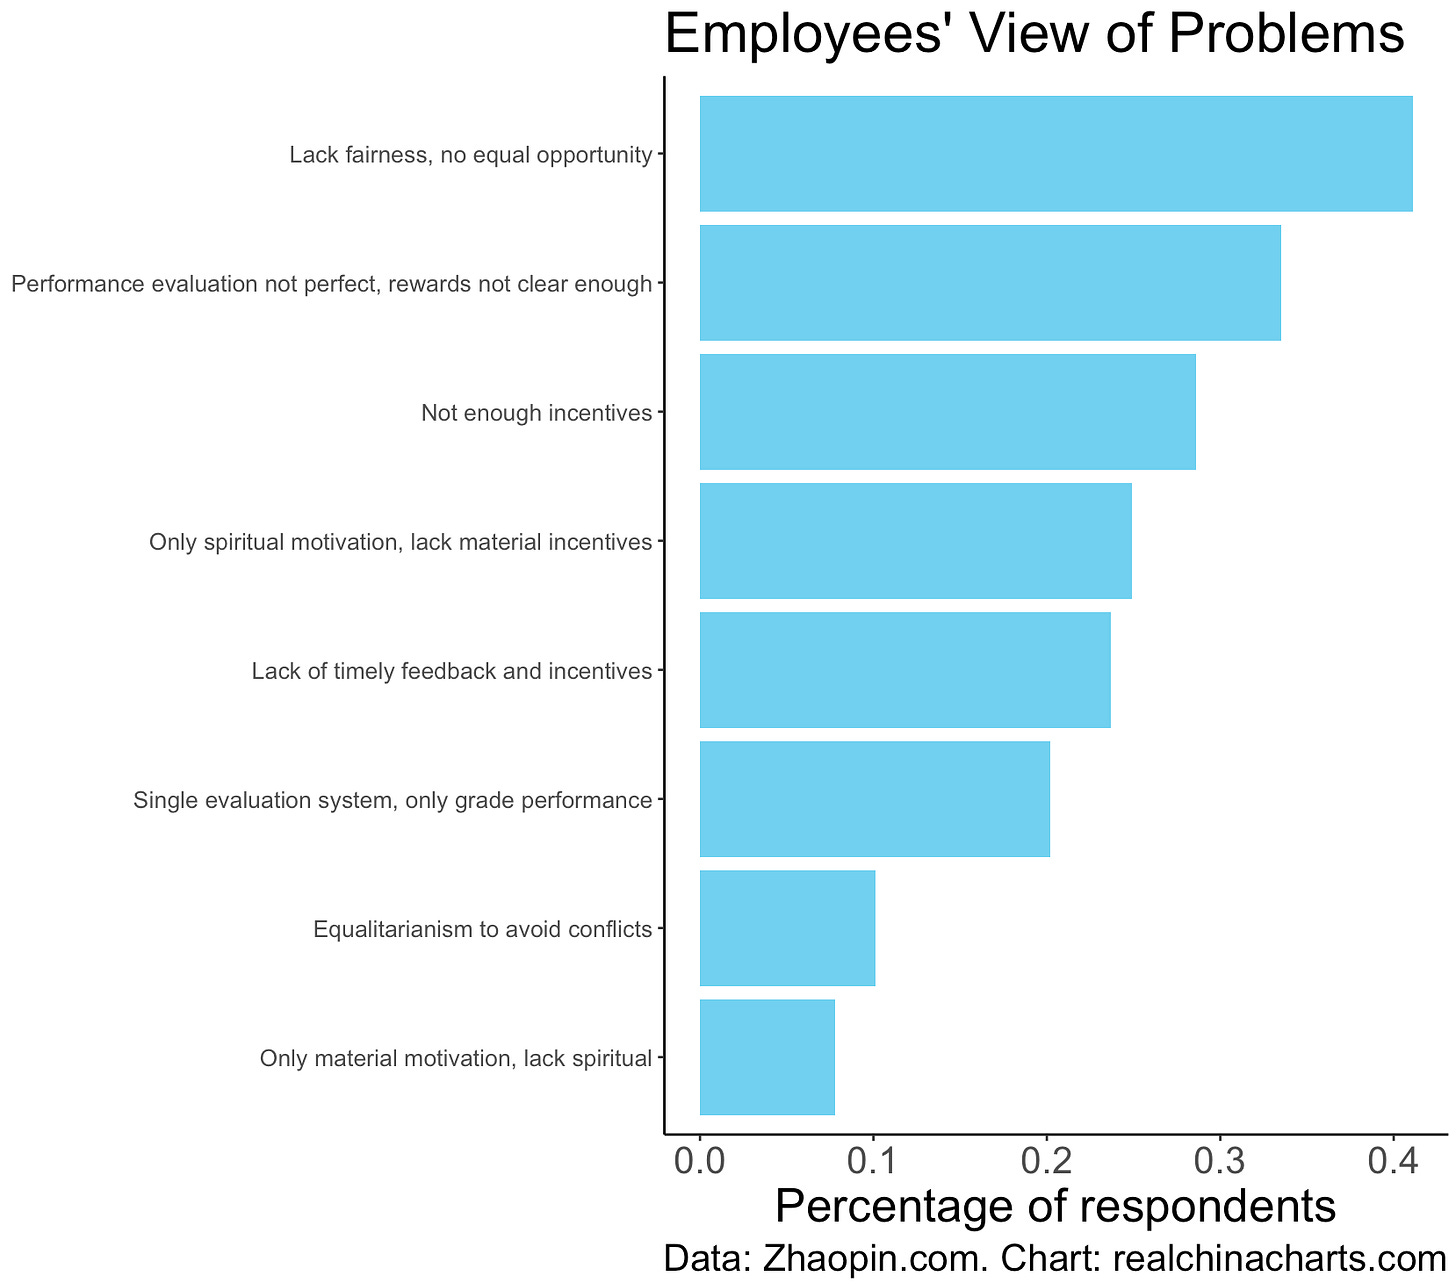 Employees' view of problems in the workplace, China survey